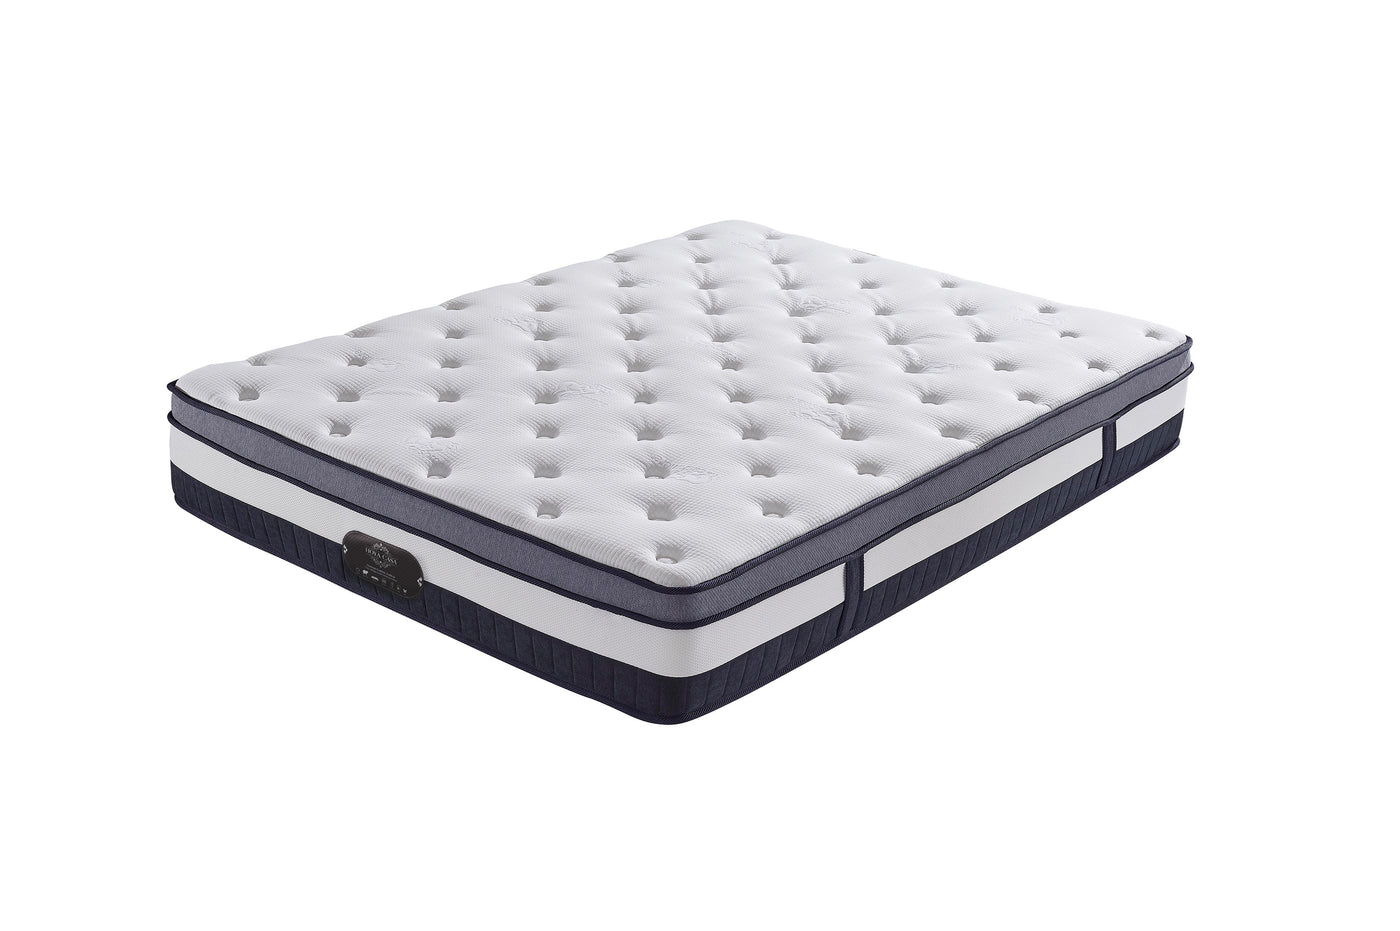 Hybrid iSilent Mattress Hoya Casa Hoyacasa.ca couch sofa bed 4 seater sectional table kitchen table love seat sofa bed matress Toronto Canada manufactures home decoration frames indoor Ottoman